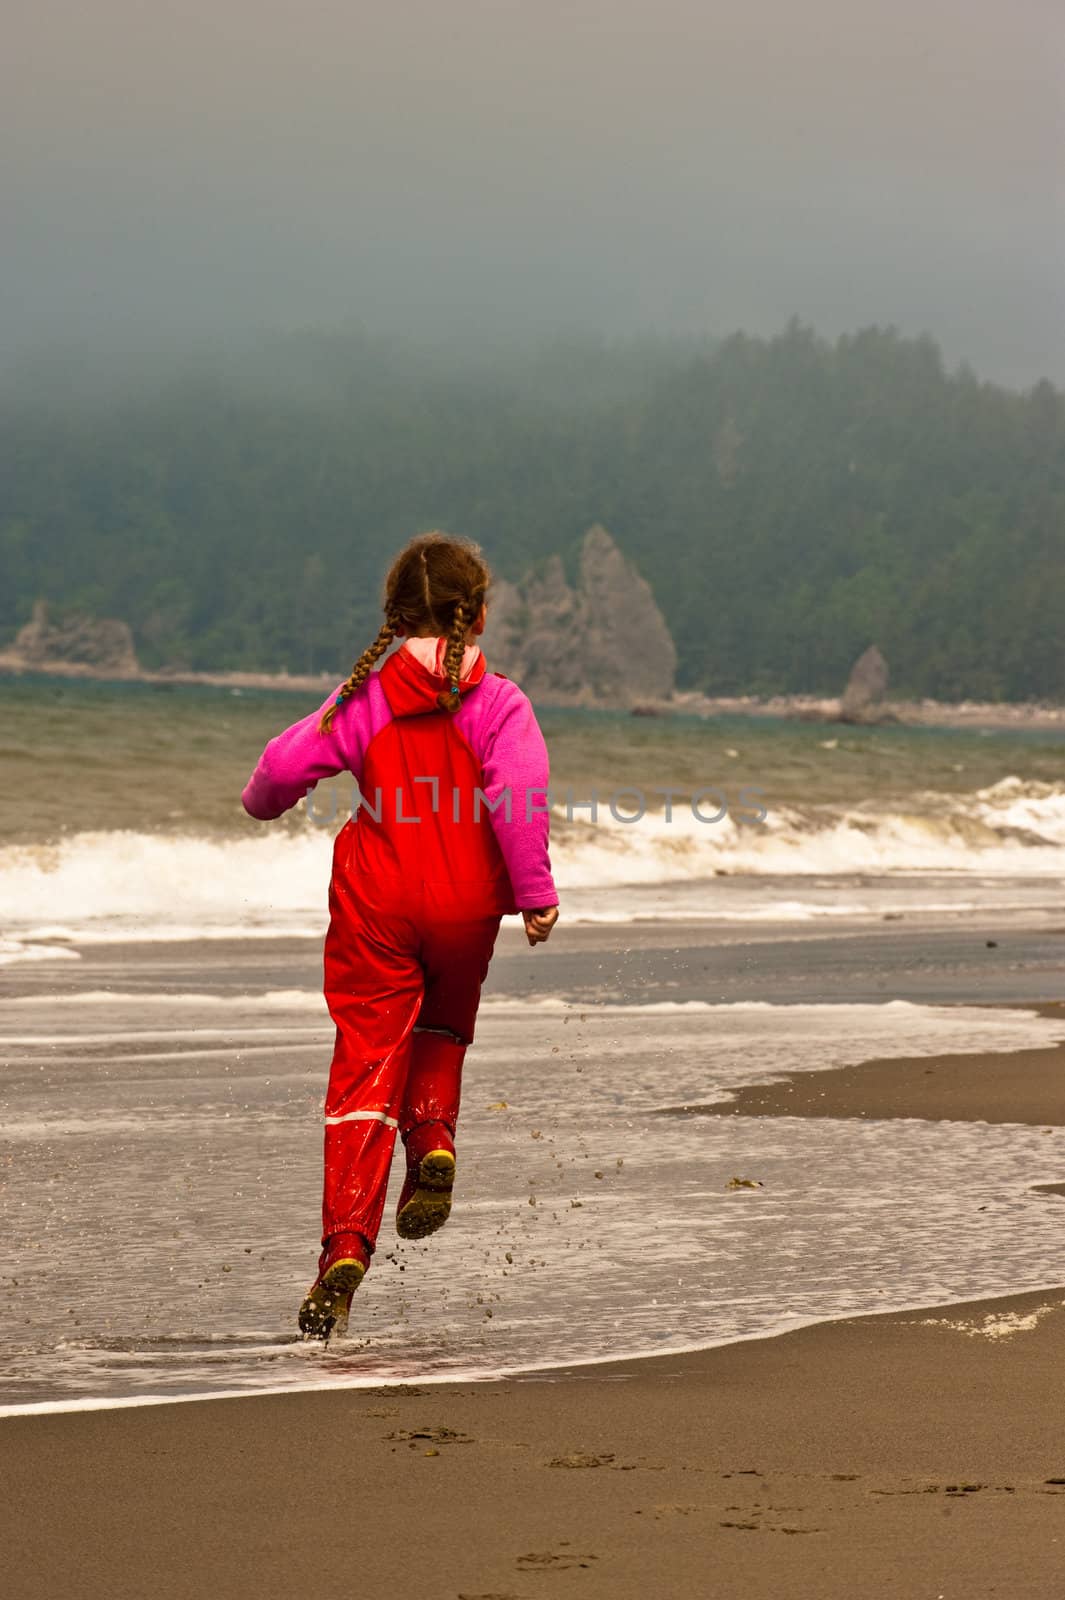 young girl in red rain clothes, skipping down beach shore